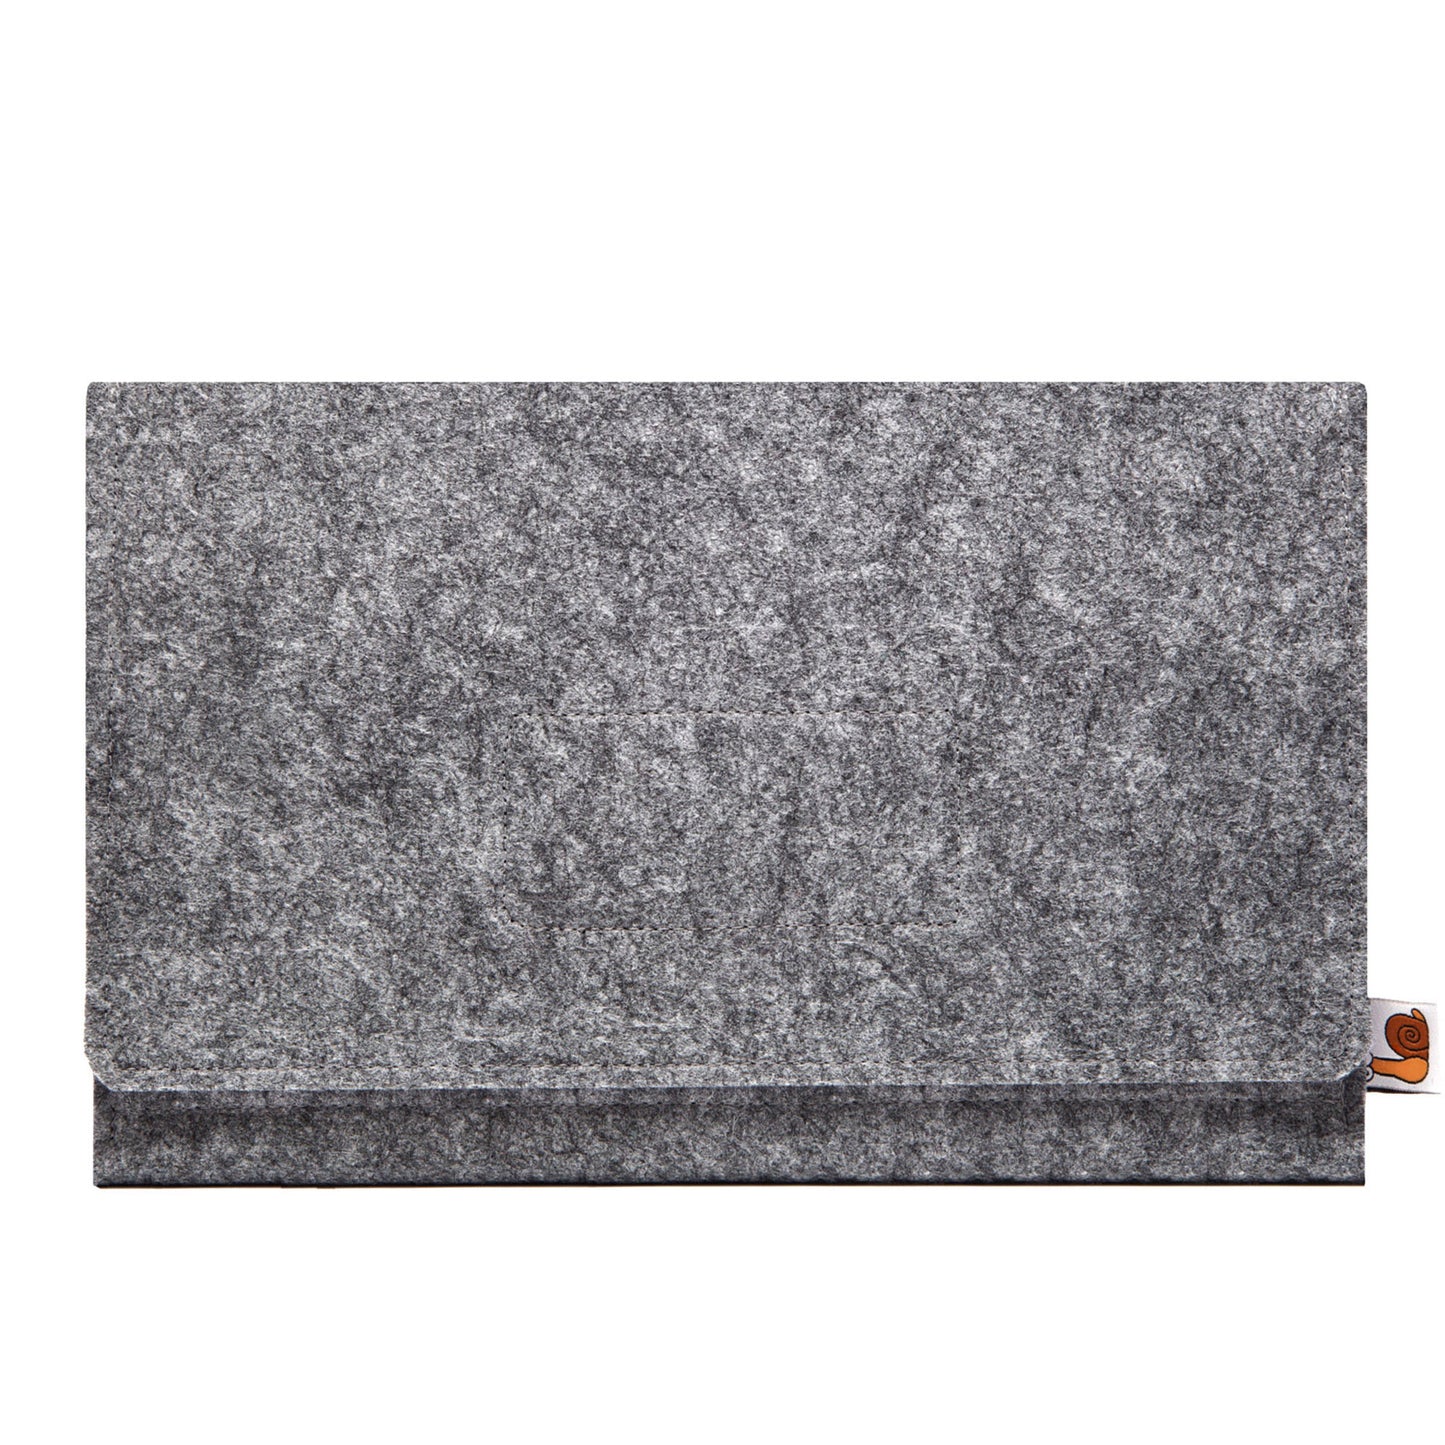 Premium Felt iPad Cover: Ultimate Protection with Accessories Pocket - Grey & Turquoise